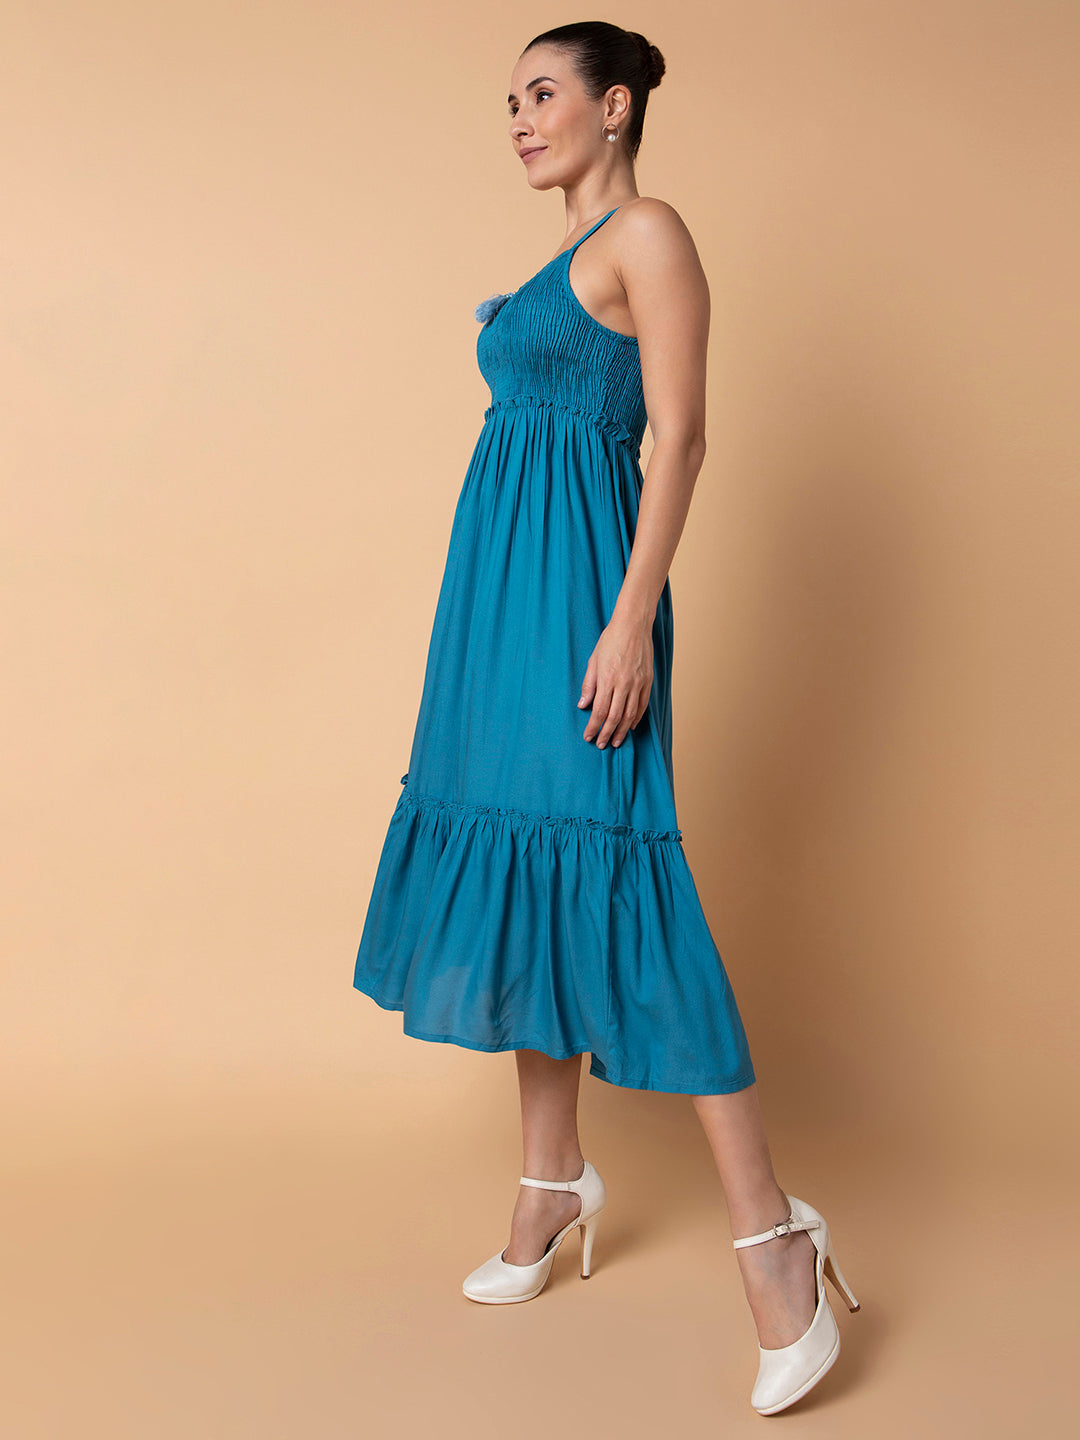 Women Solid Blue Midi Fit and Flare Dress with Shrug and Belt